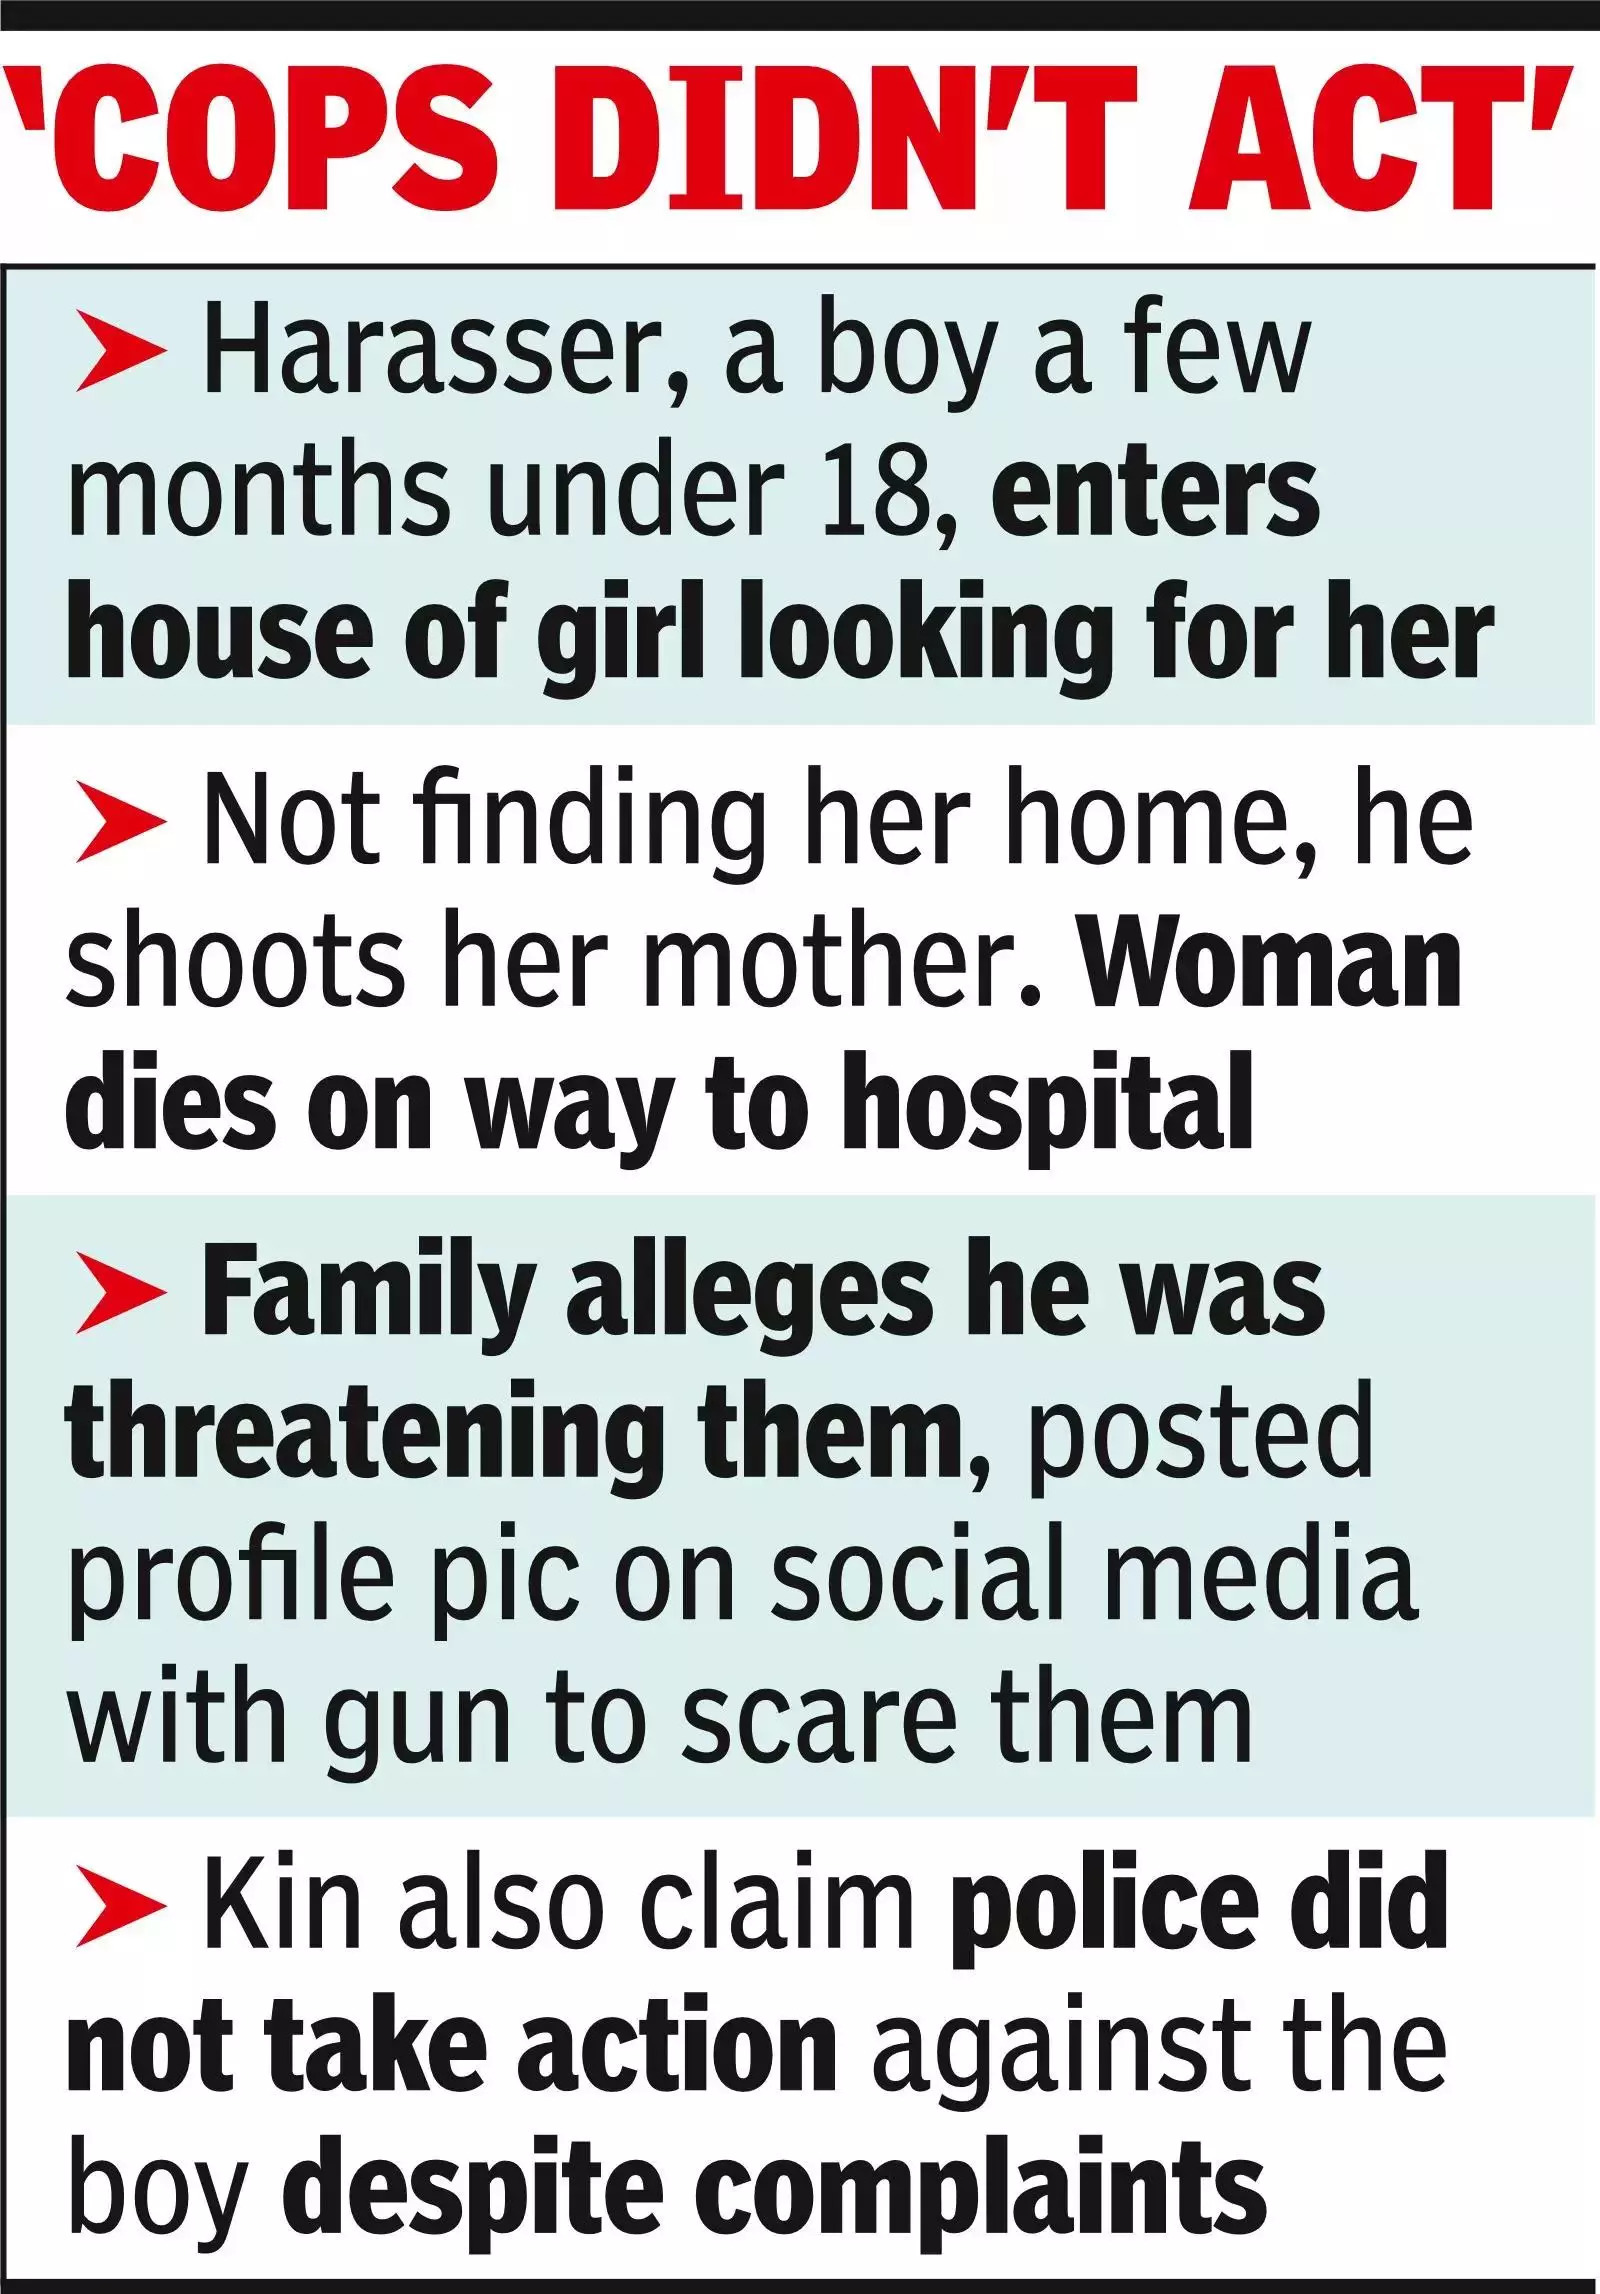 Harasser storms house of girl, 15, looking for her, shoots her mom (1).